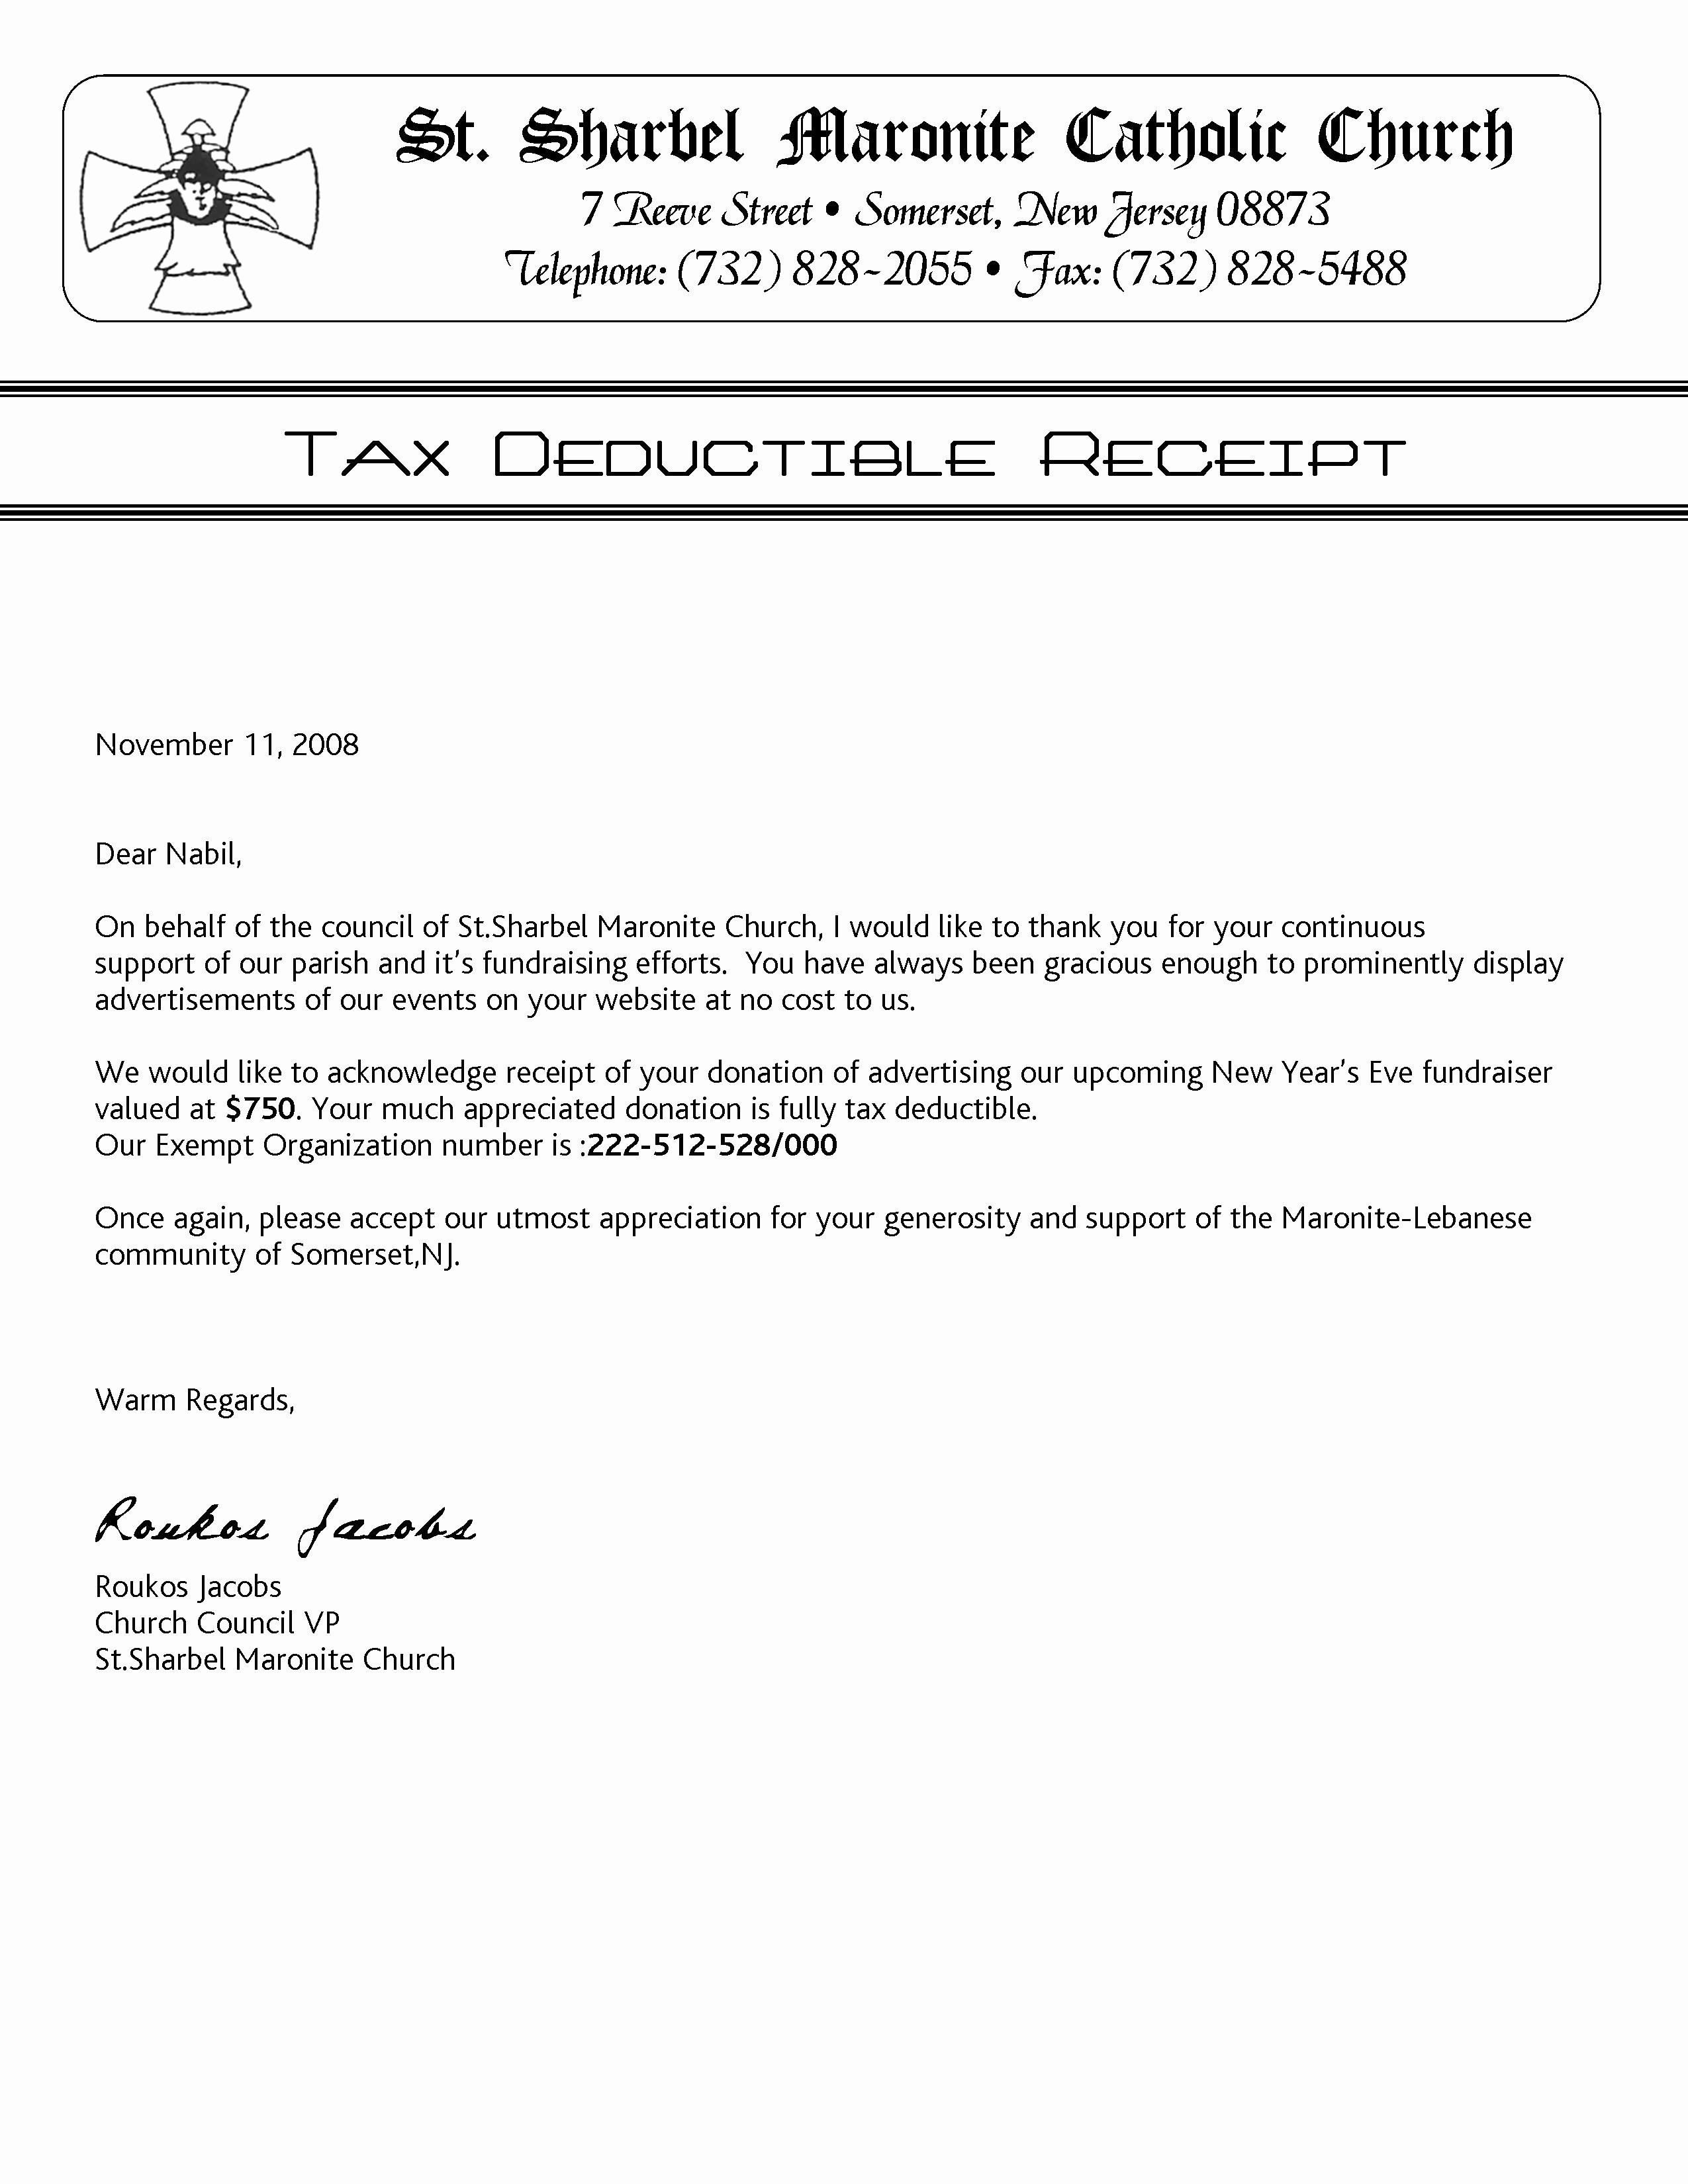 Donation Receipt Letter Template Elegant Church Donation Letter for Tax Purposes